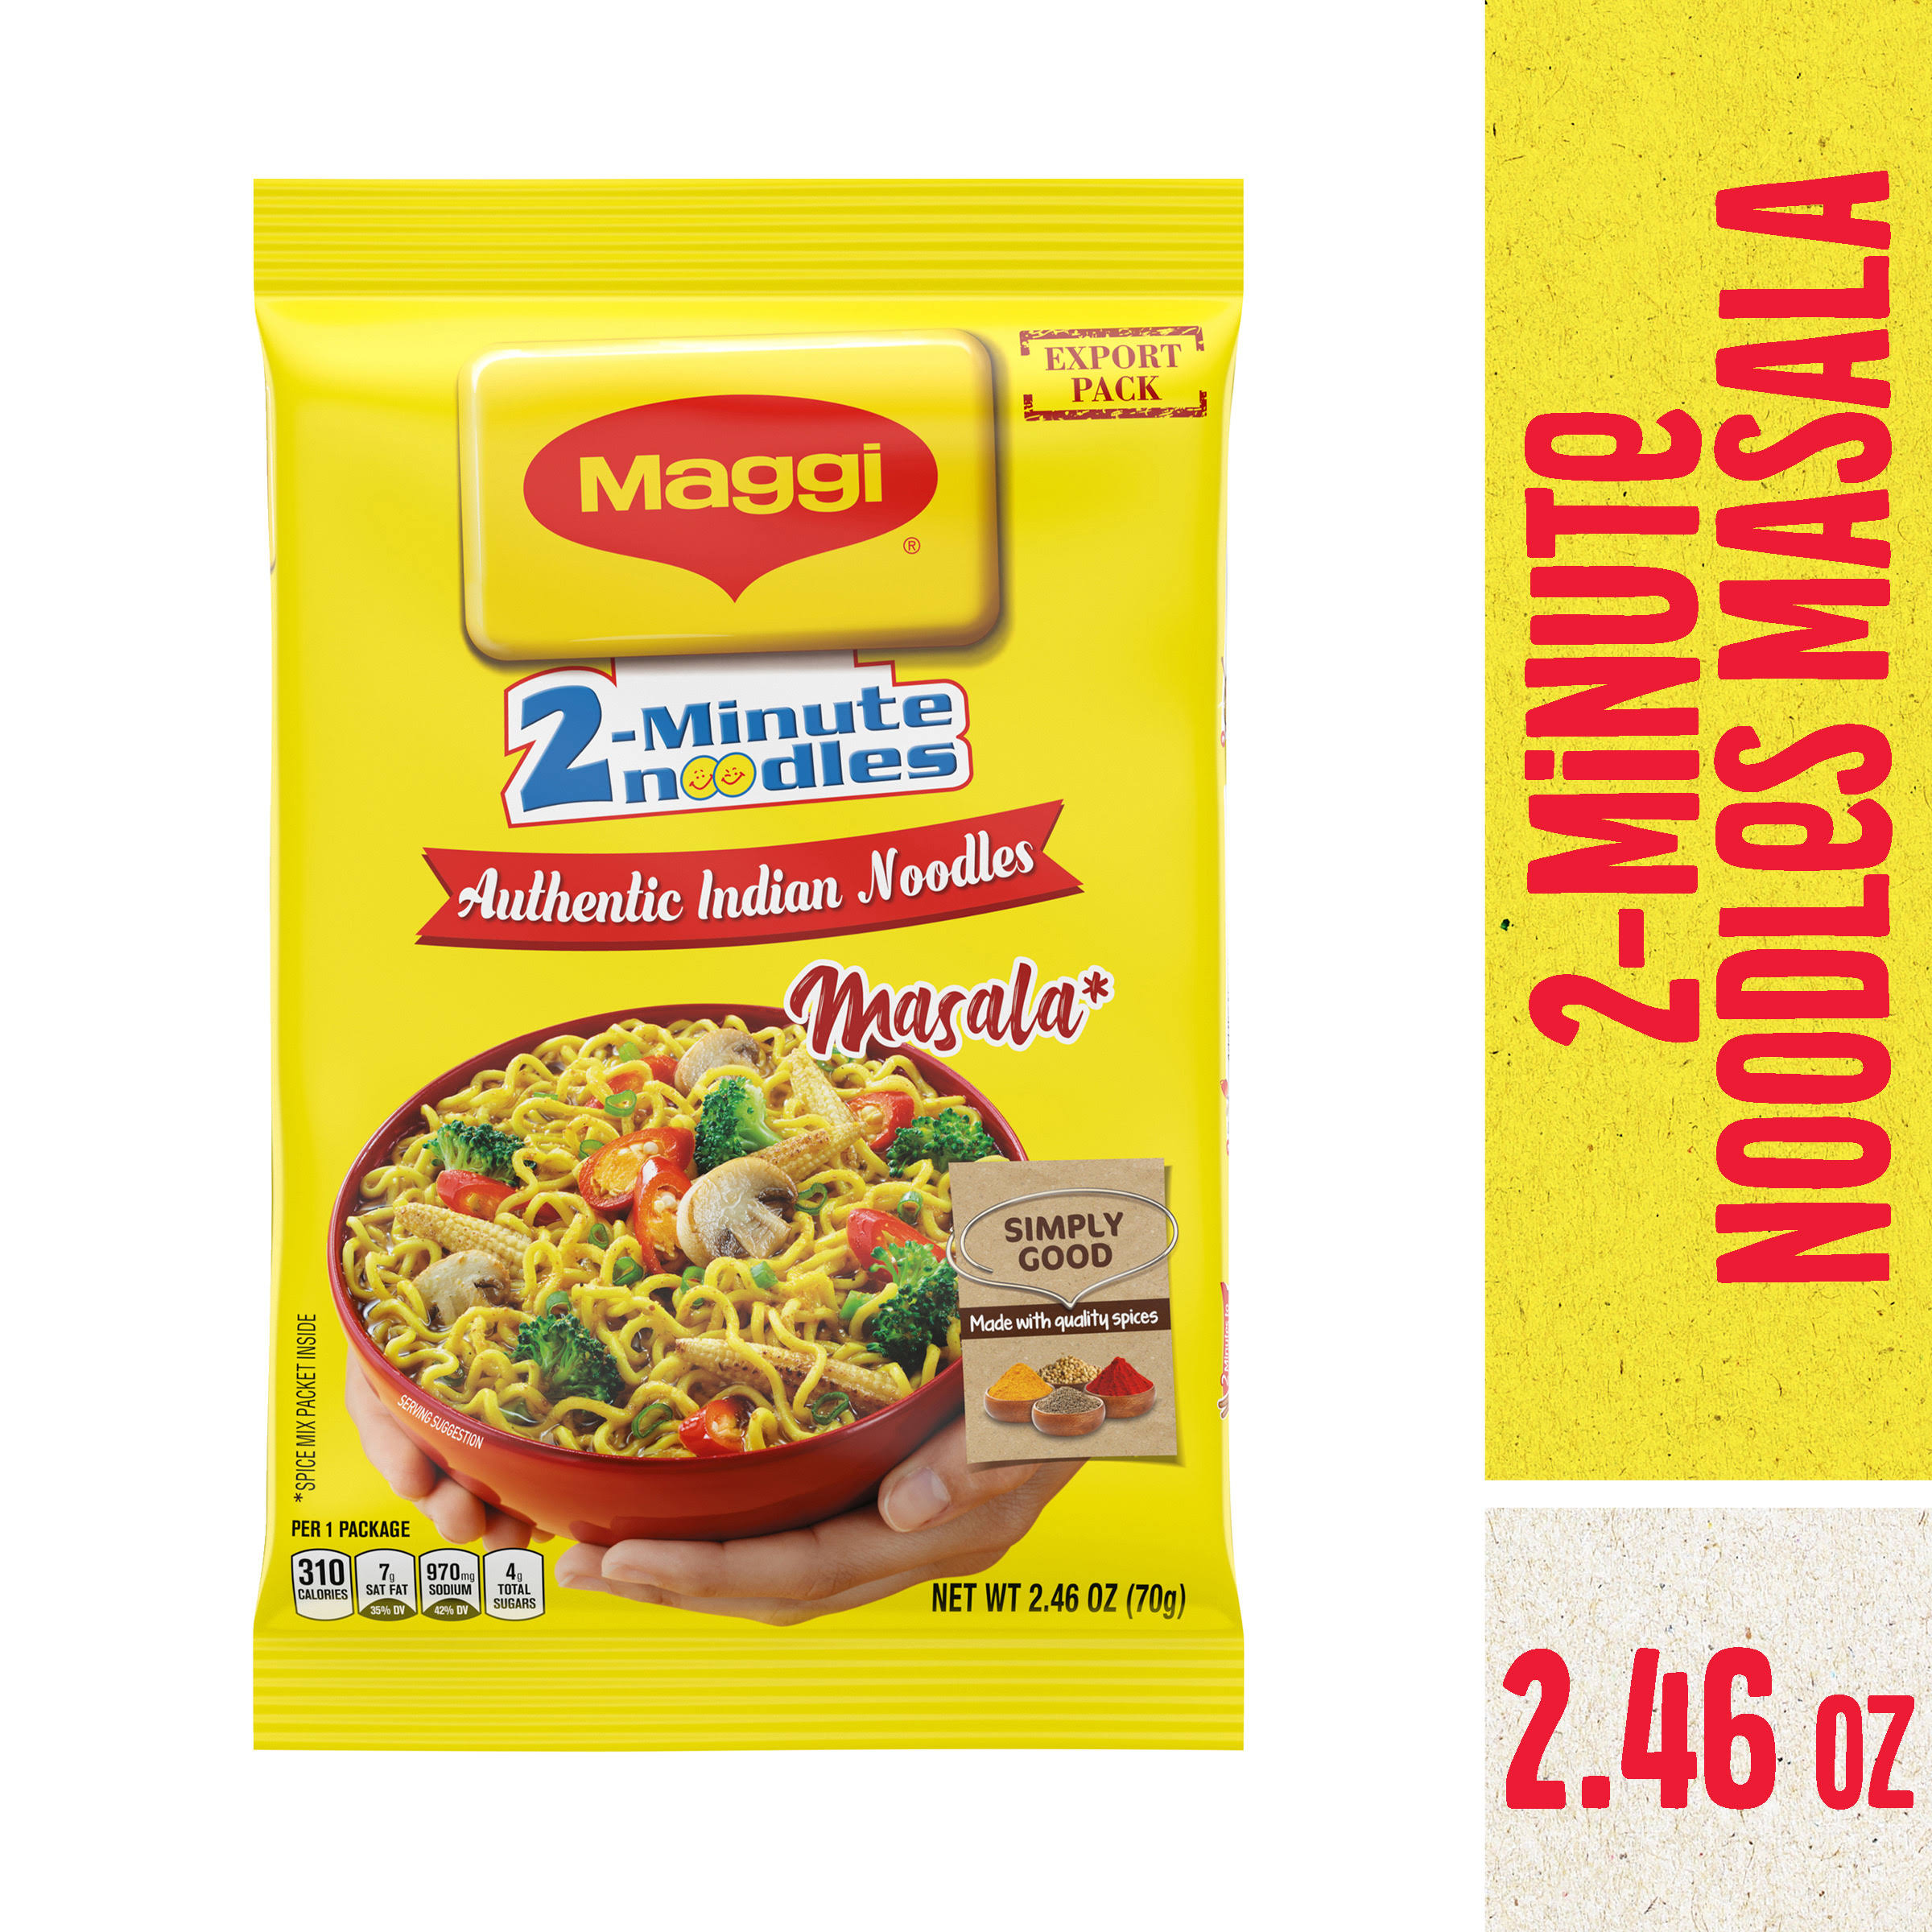 Maggi Masala 2-minute Noodles India Snack - Pack Of 3